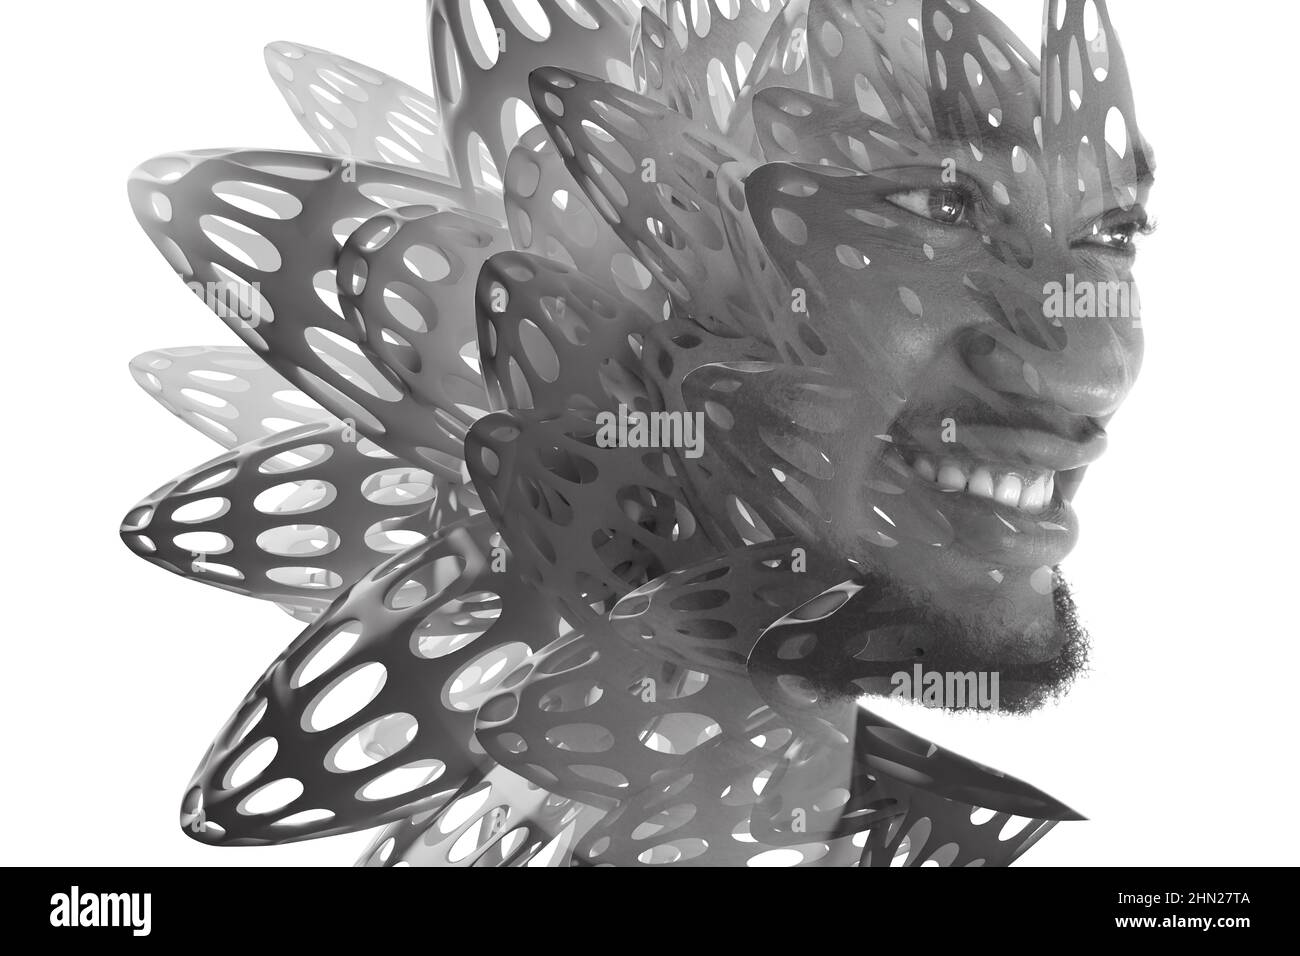 A portrait of a man combined with 3D figures in a double exposure technique. Stock Photo